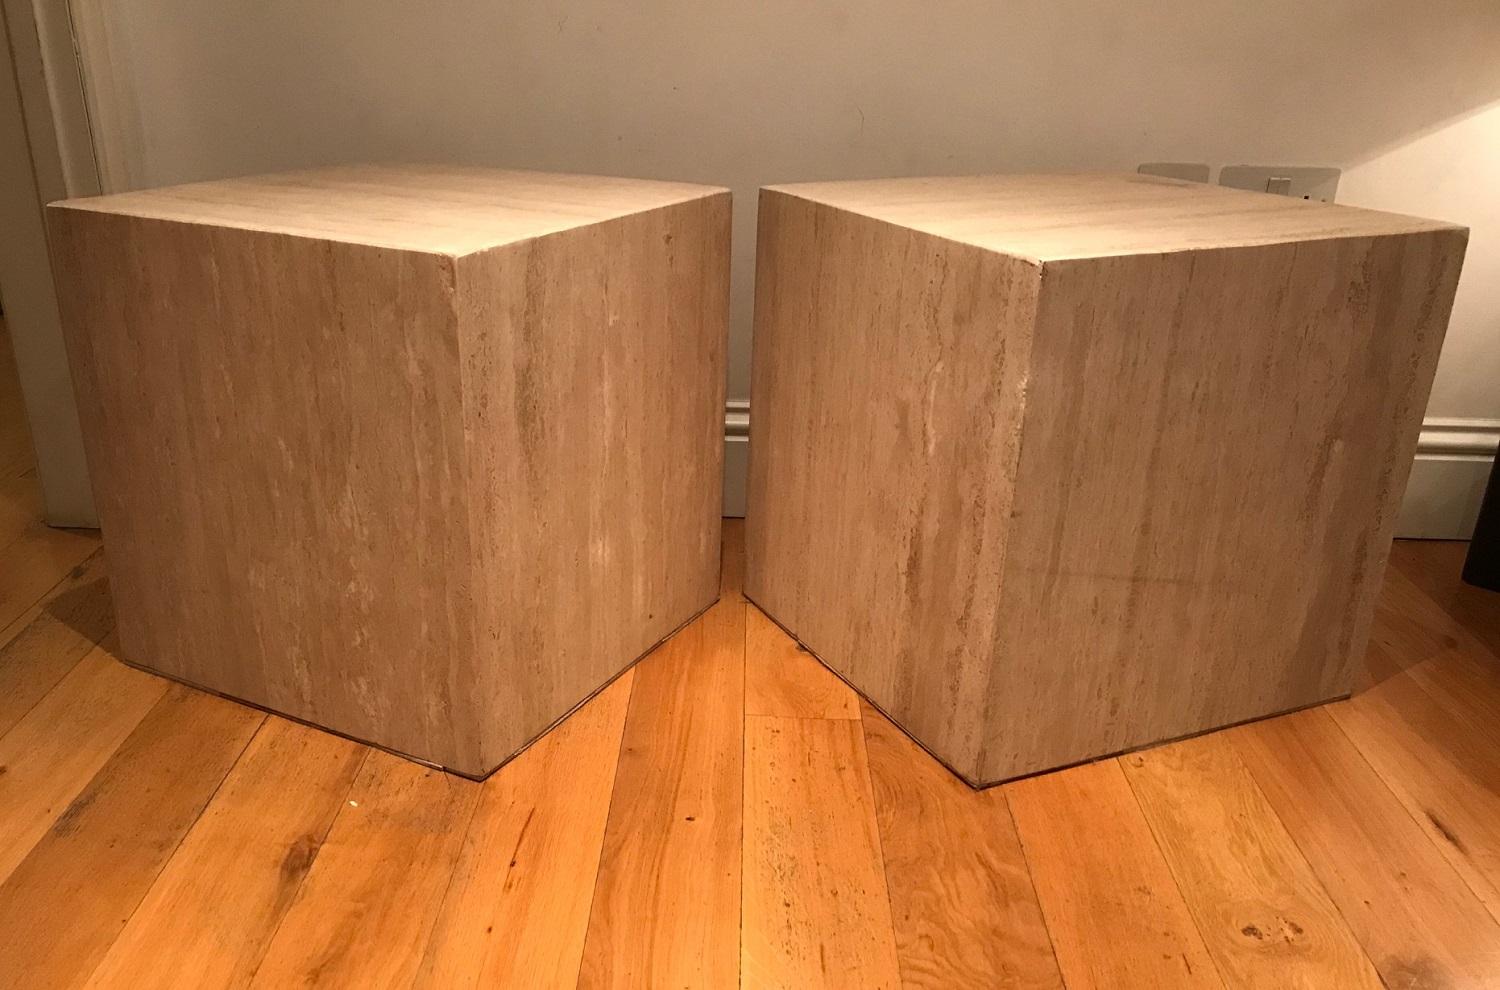 A pair of French 1970s travertine block panelled cube side tables/bout de canapes. An elegant design which looks modern and both elegant and can complement a contemporary or classic interior.